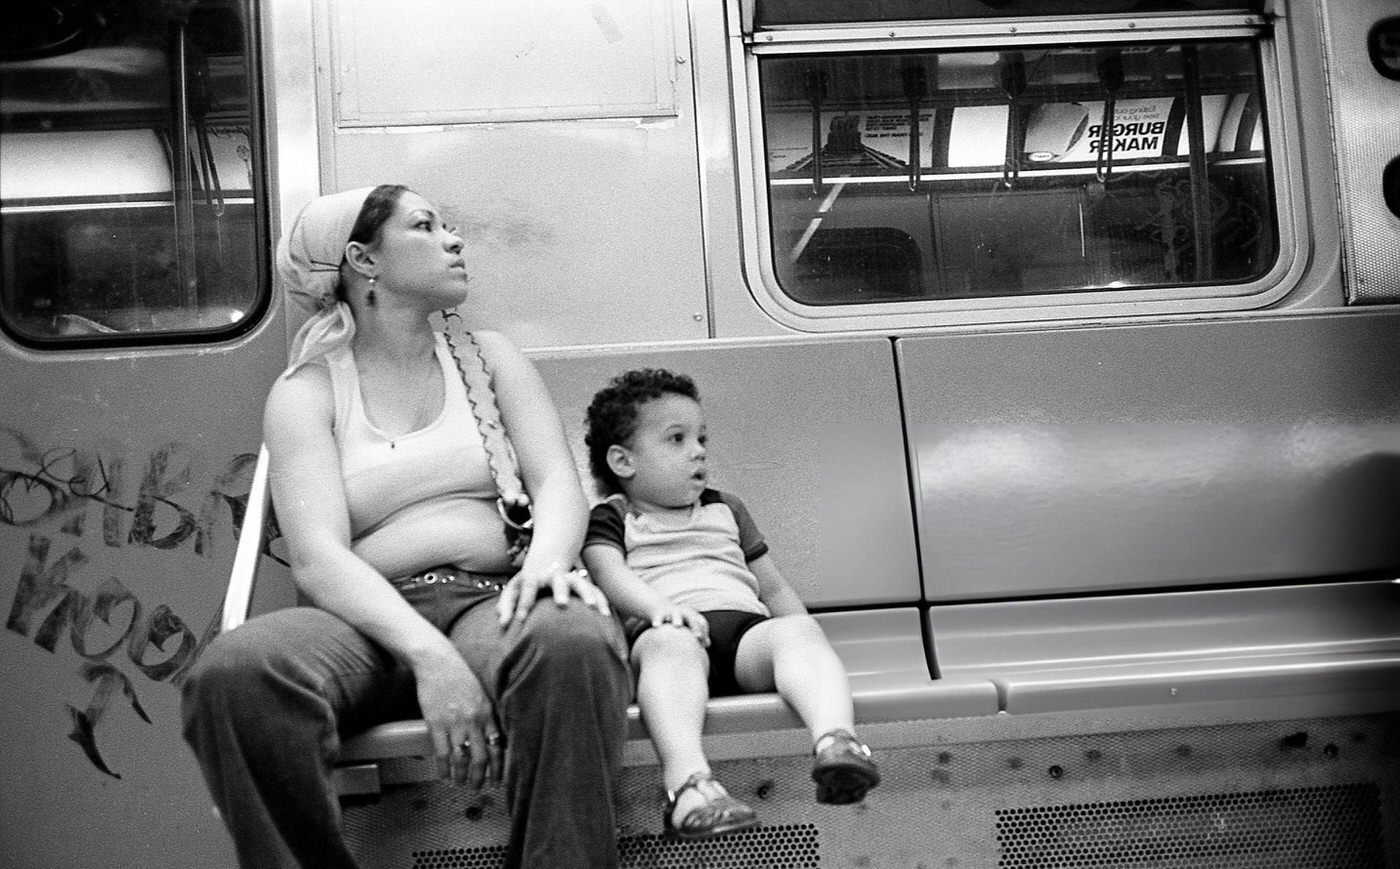 A Woman And A Young Child Ride A Subway Train, Queens, 1970S.